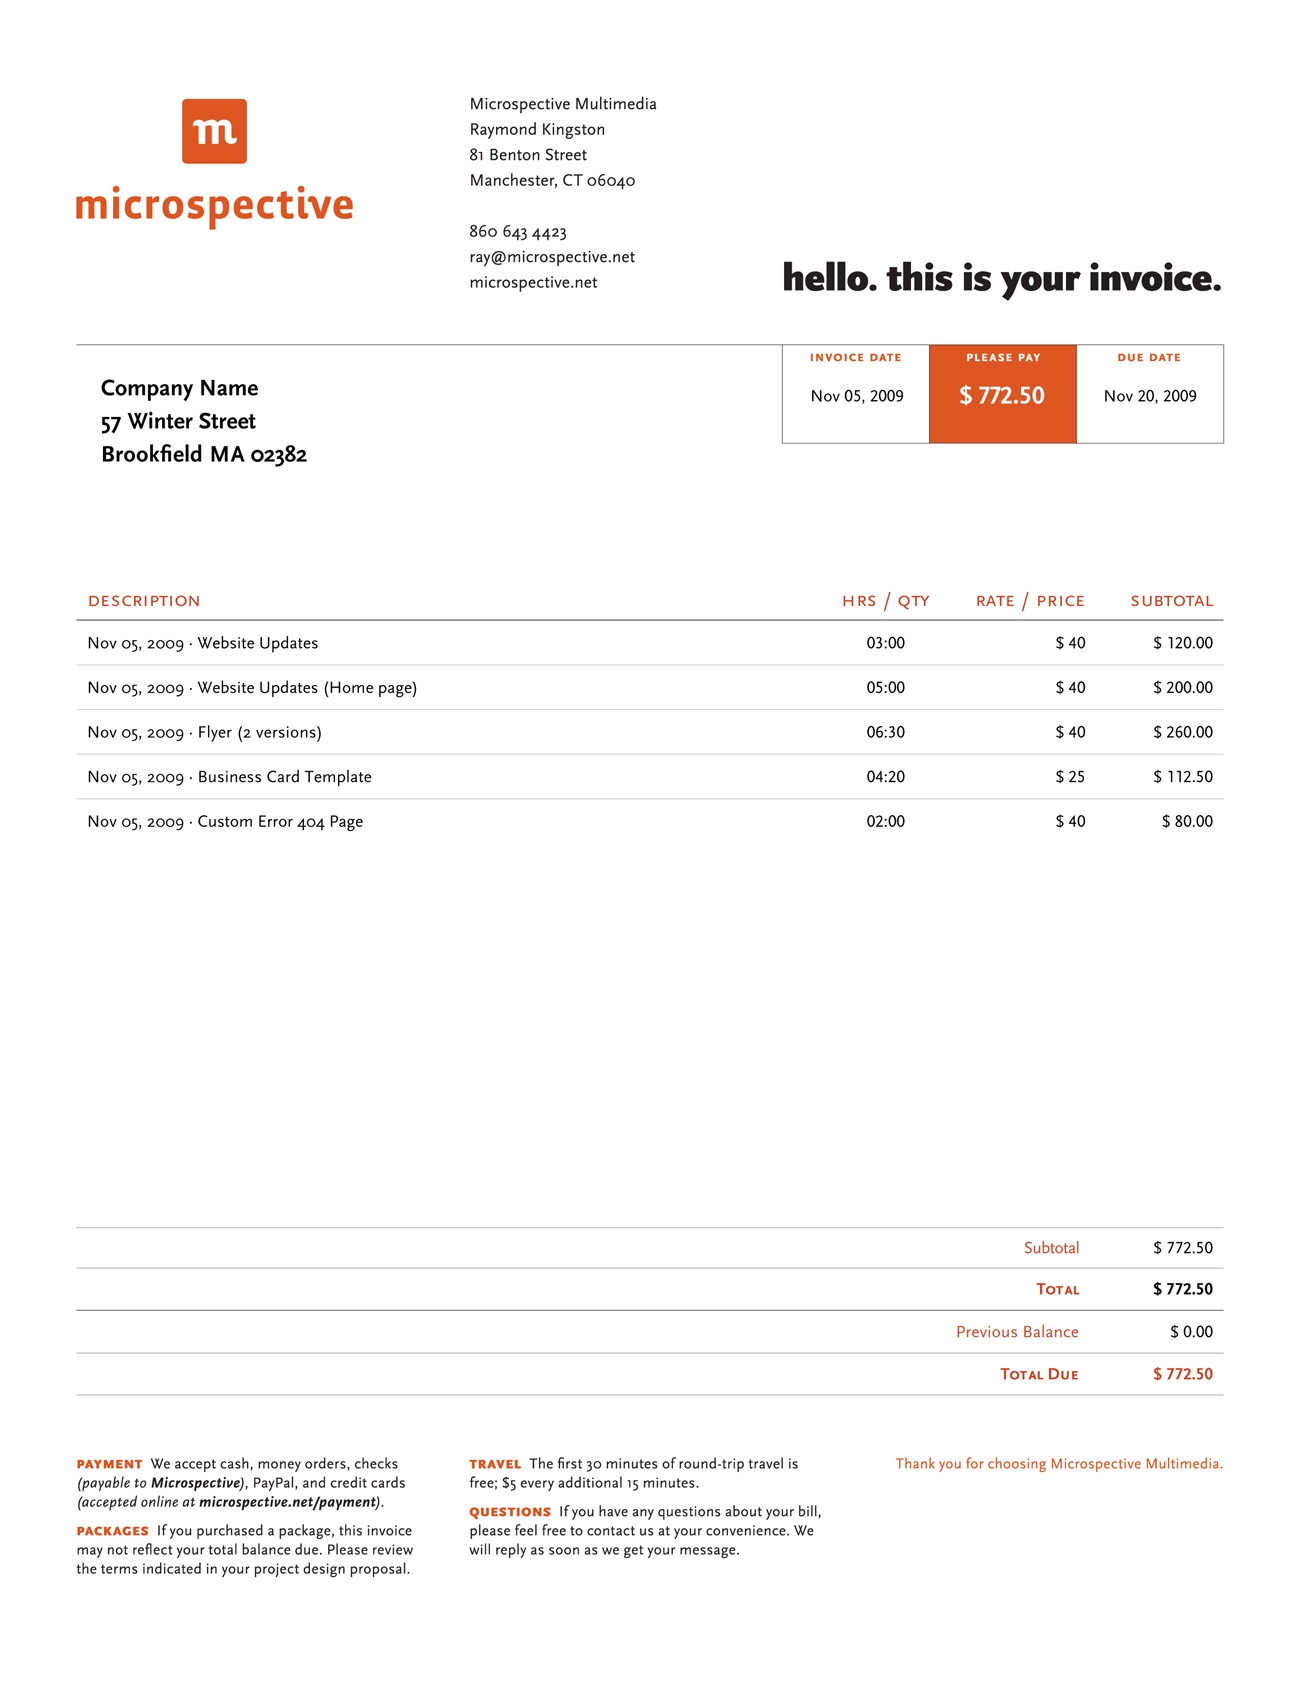 1000 images about invoicequote layouts on pinterest invoice designing an invoice